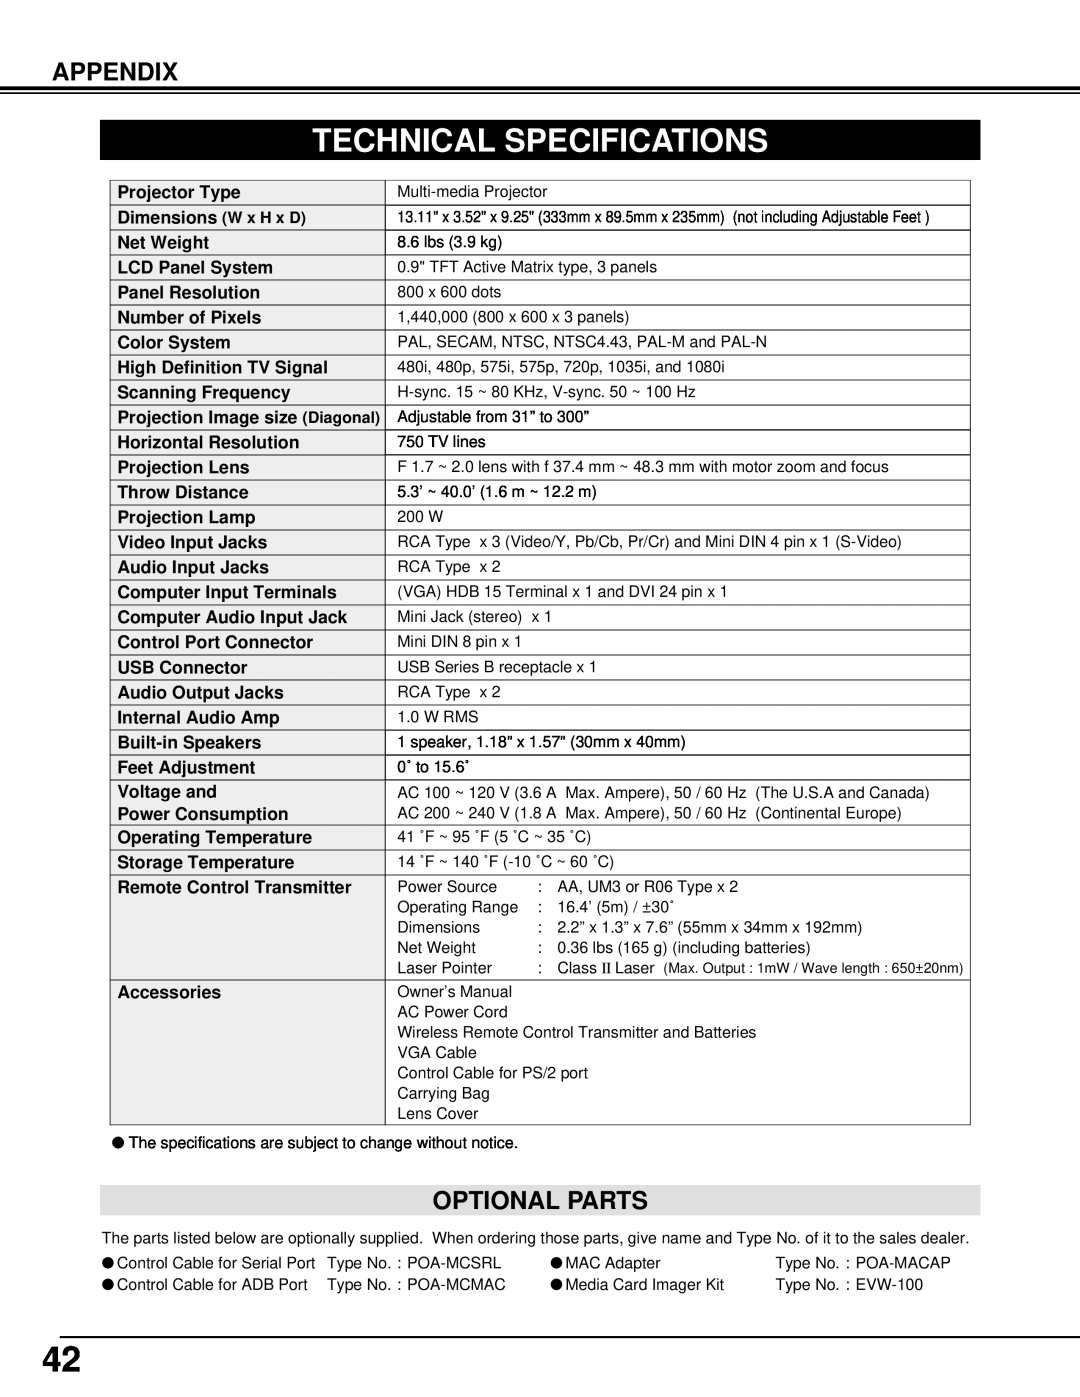 Eiki LC-NB3W owner manual Technical Specifications, Optional Parts, Appendix 